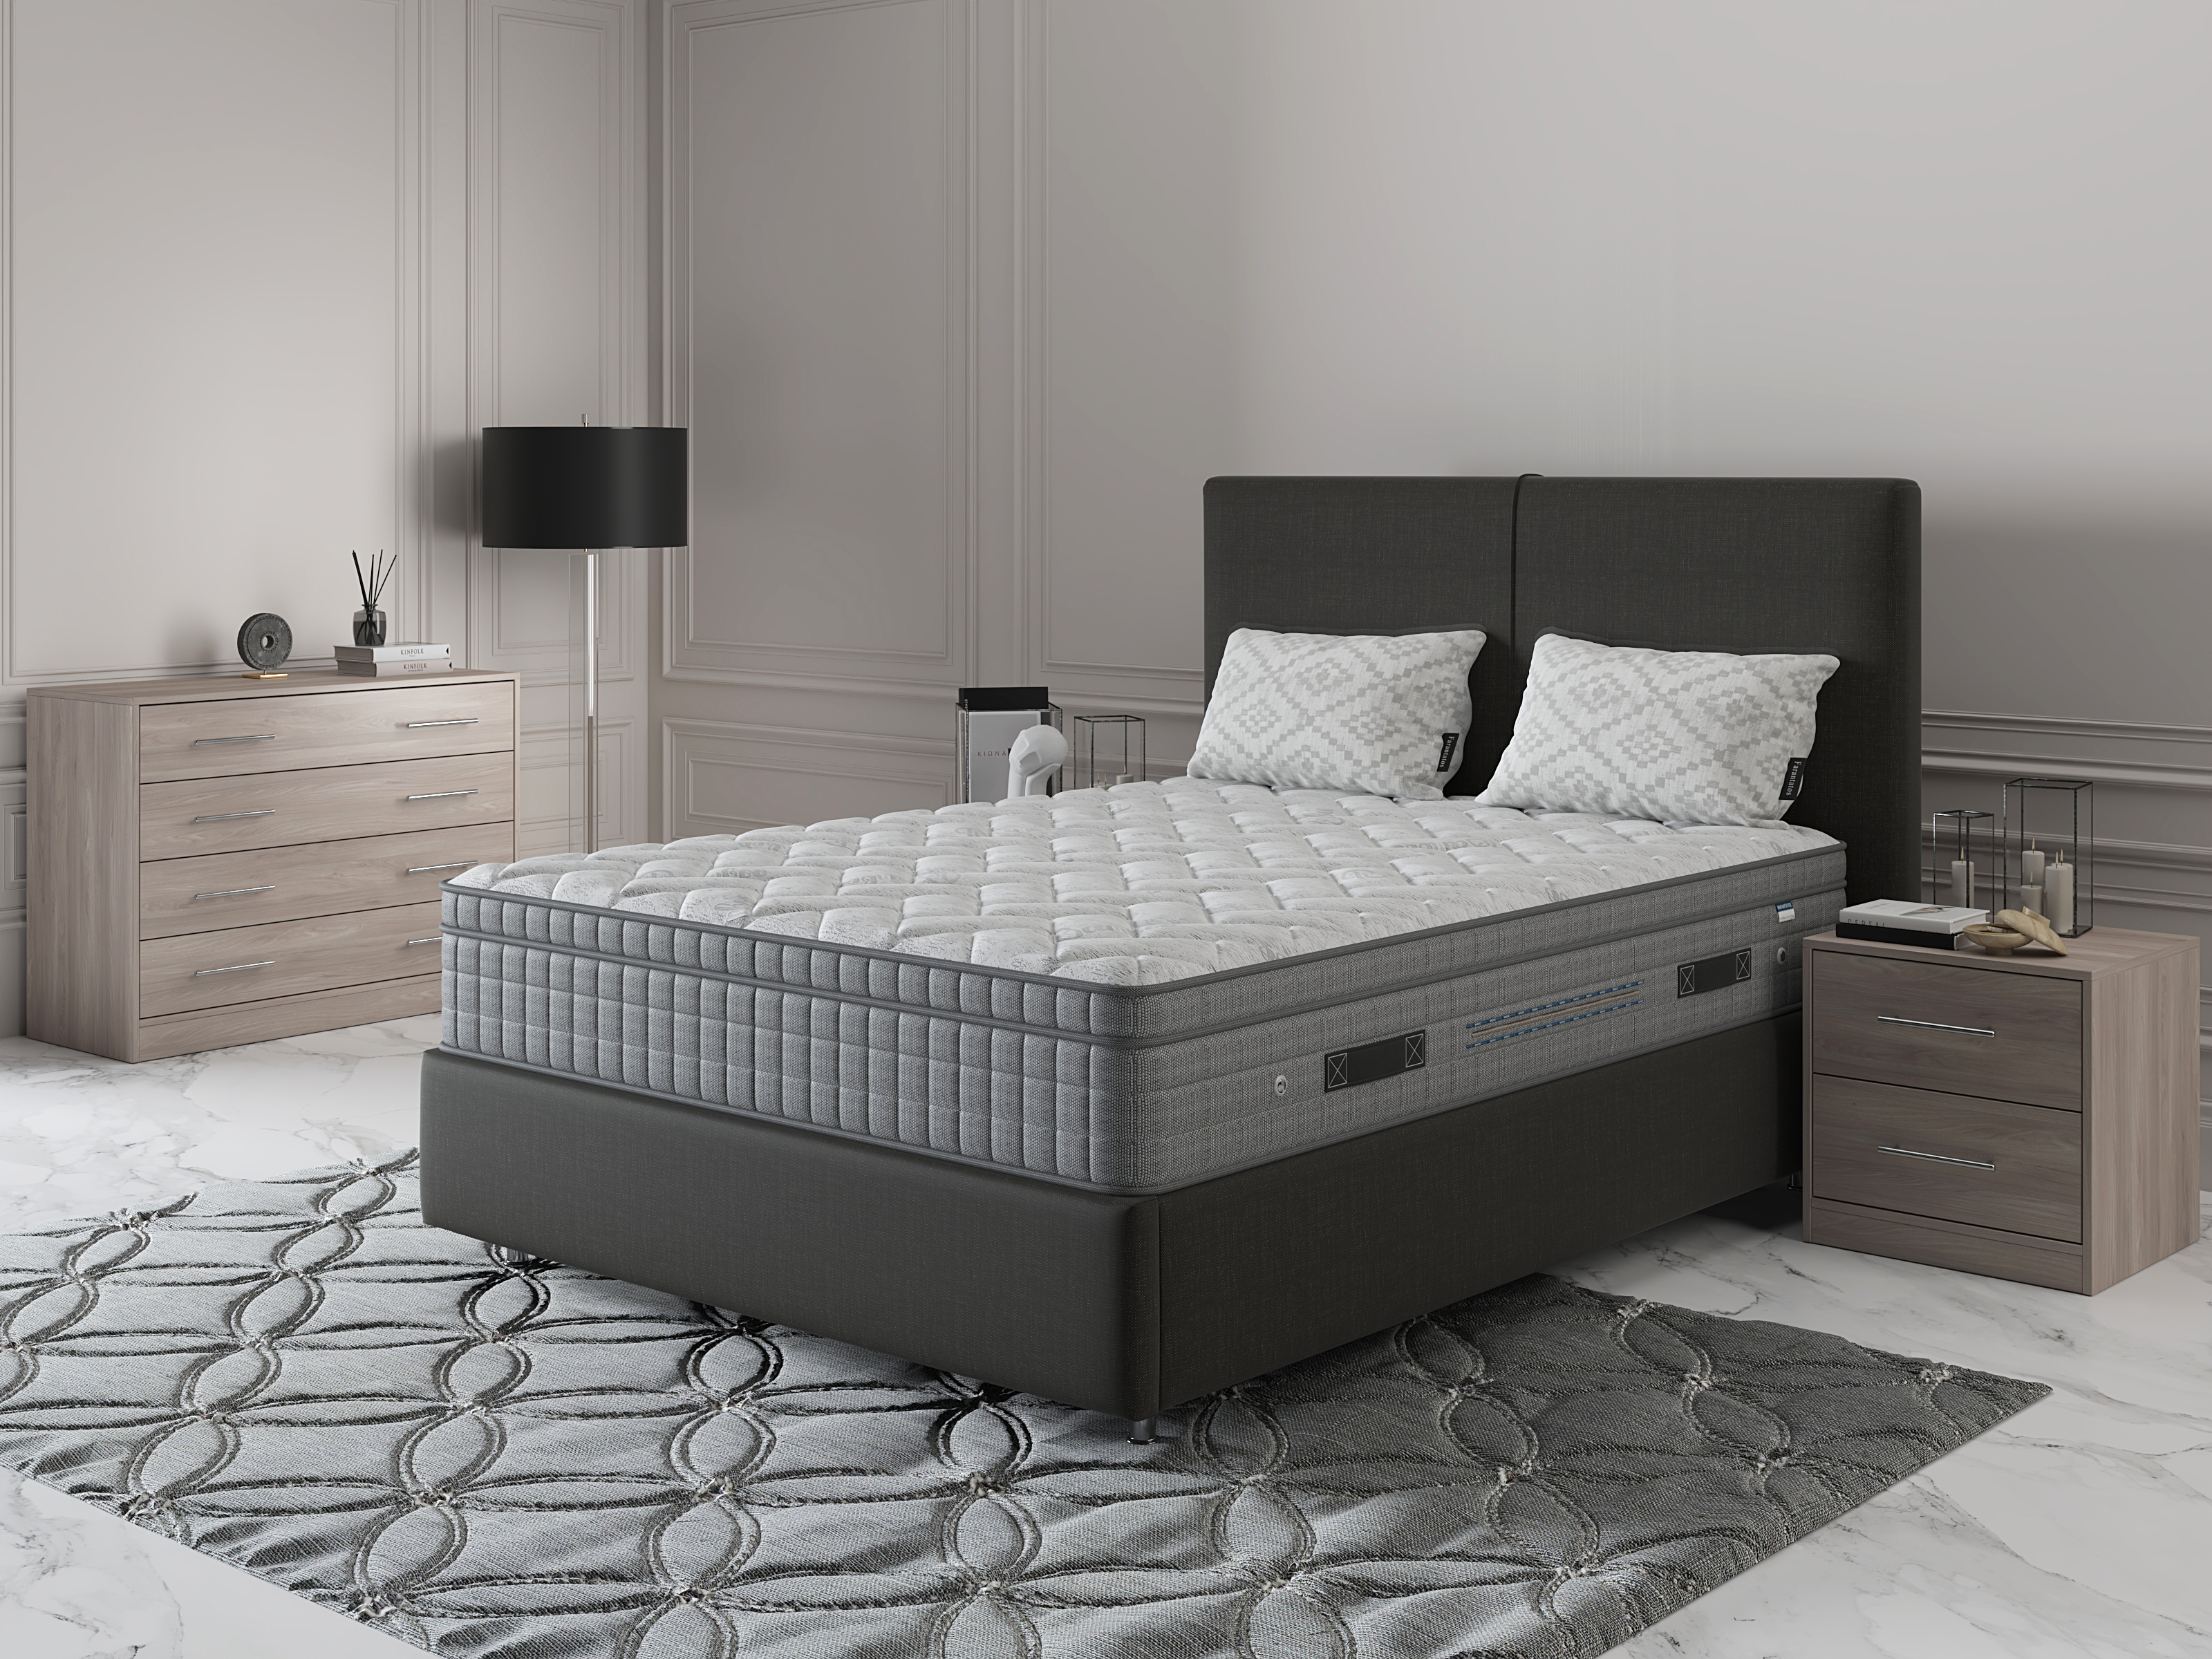 MountainClassicBed